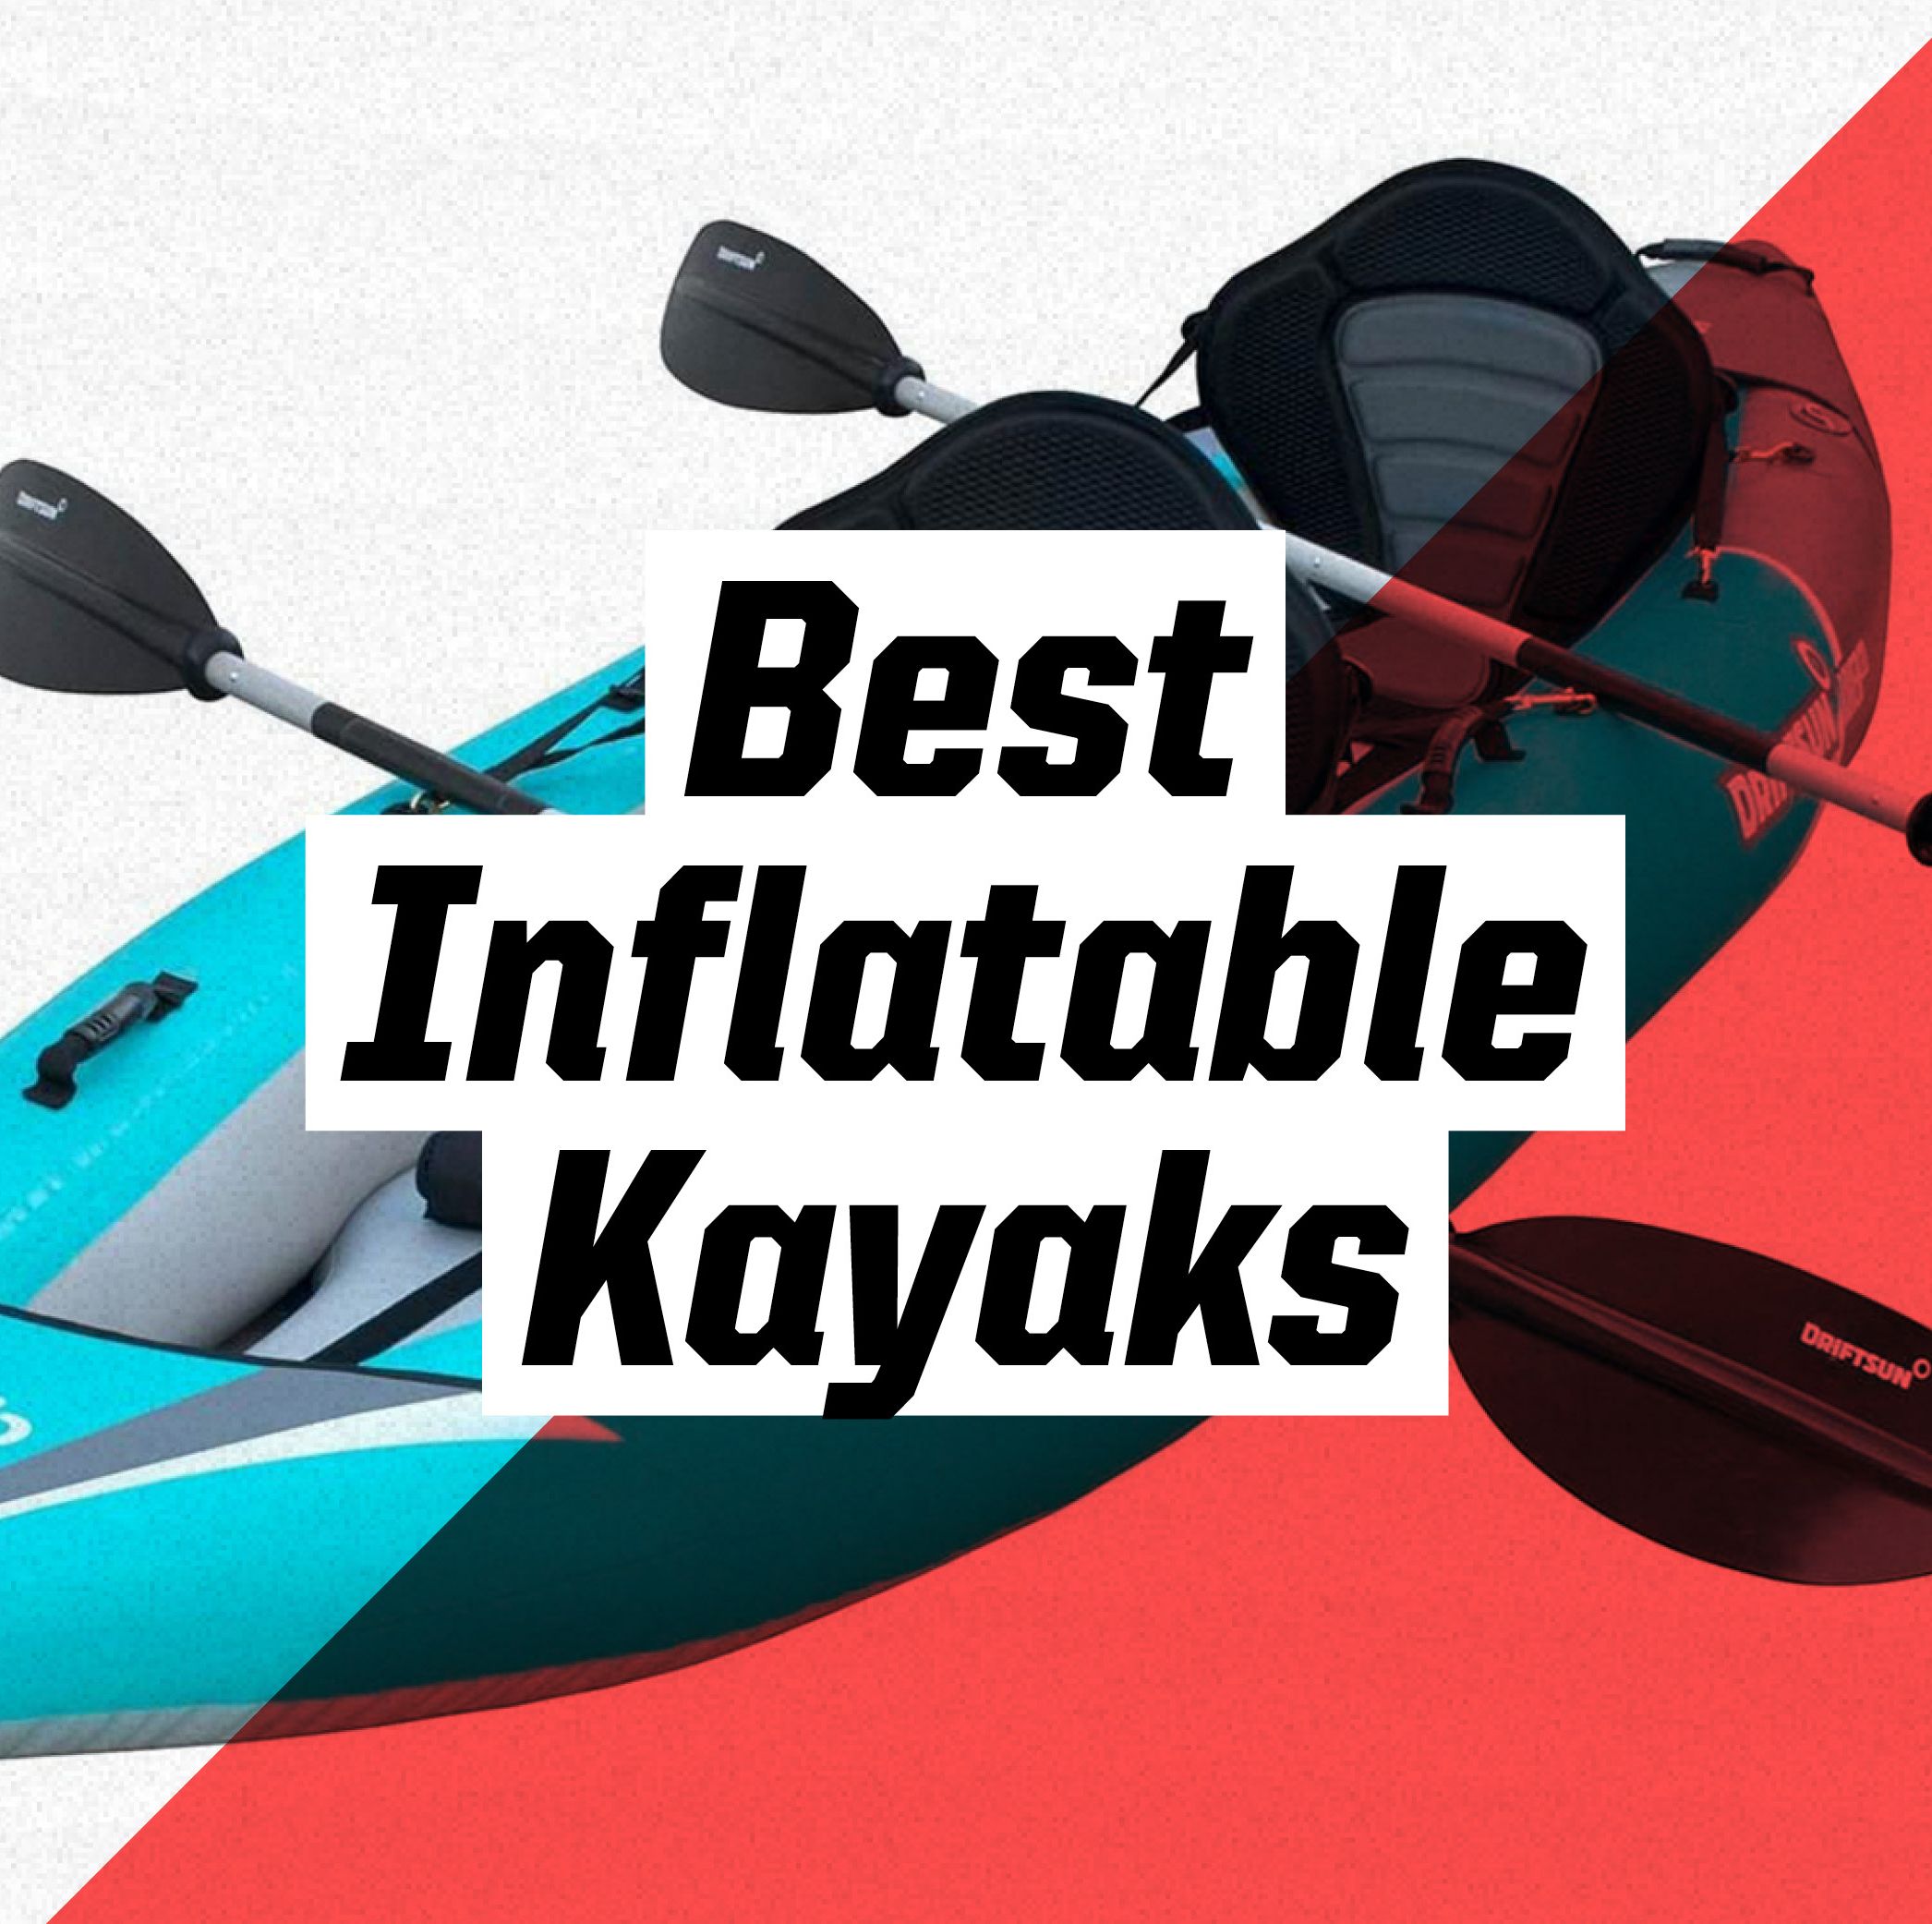 Yes, These Kayaks Actually Inflate and Fold Up for Easier Storage